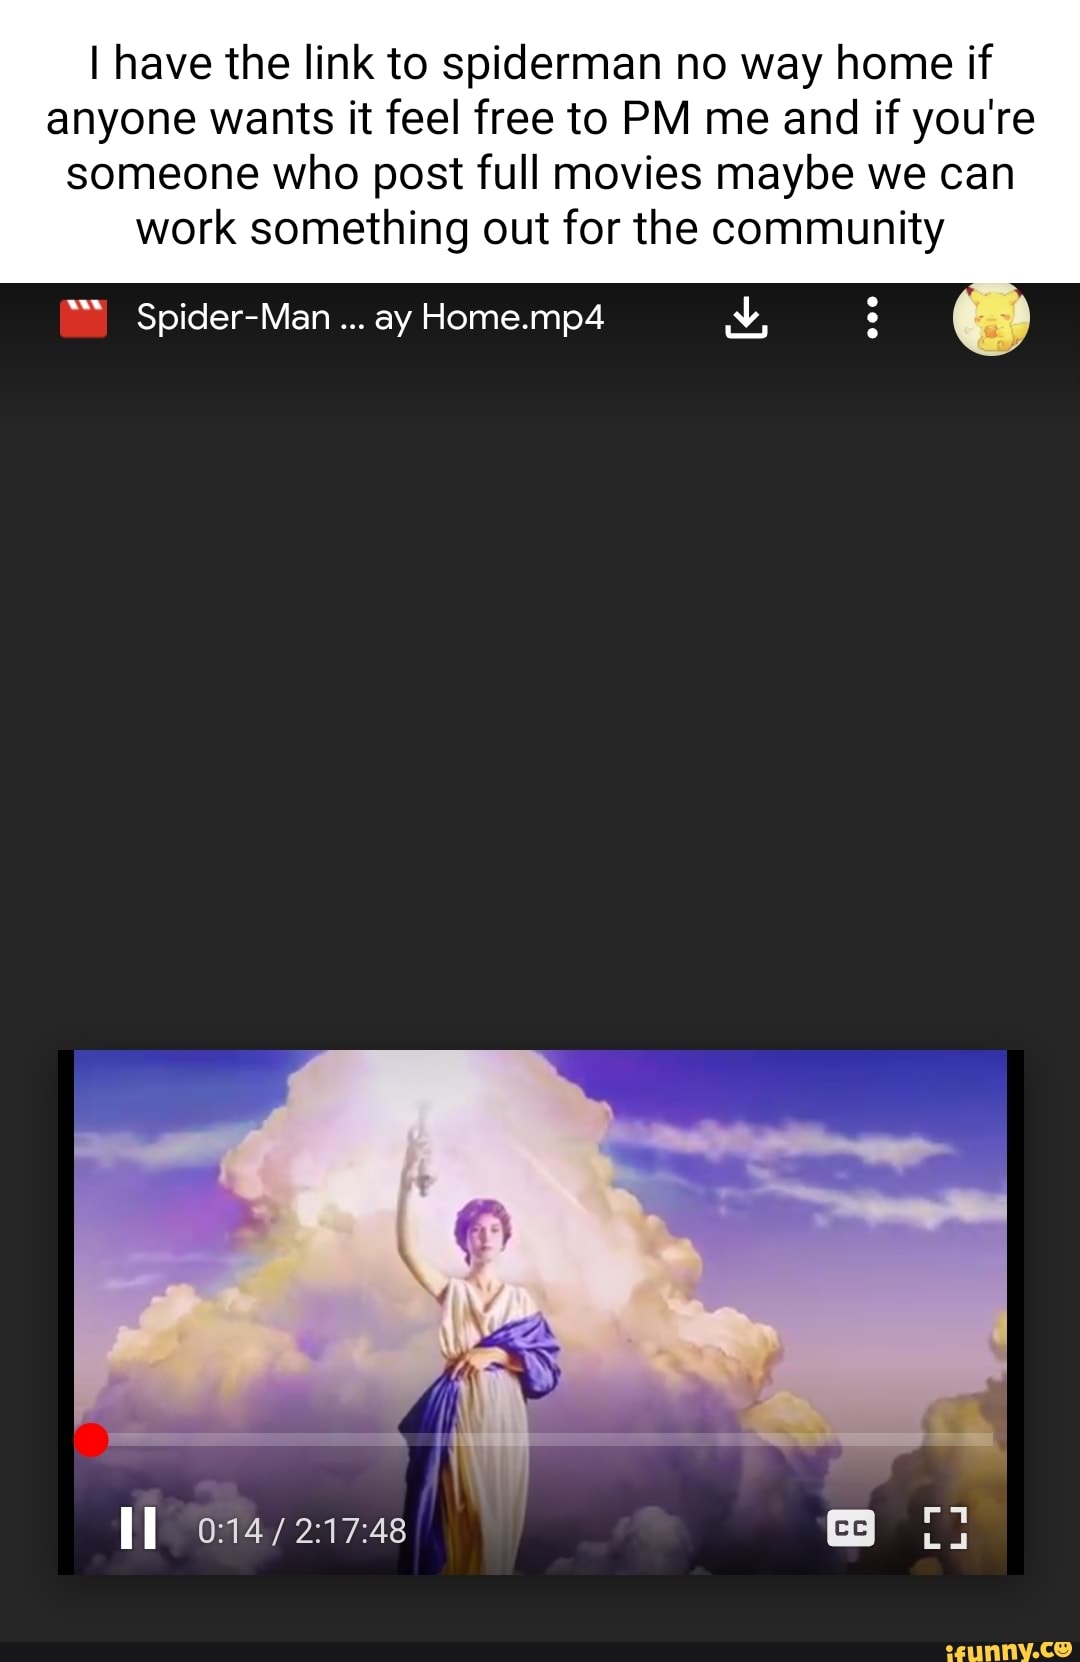 I have the link to spiderman no way home if anyone wants it feel free to